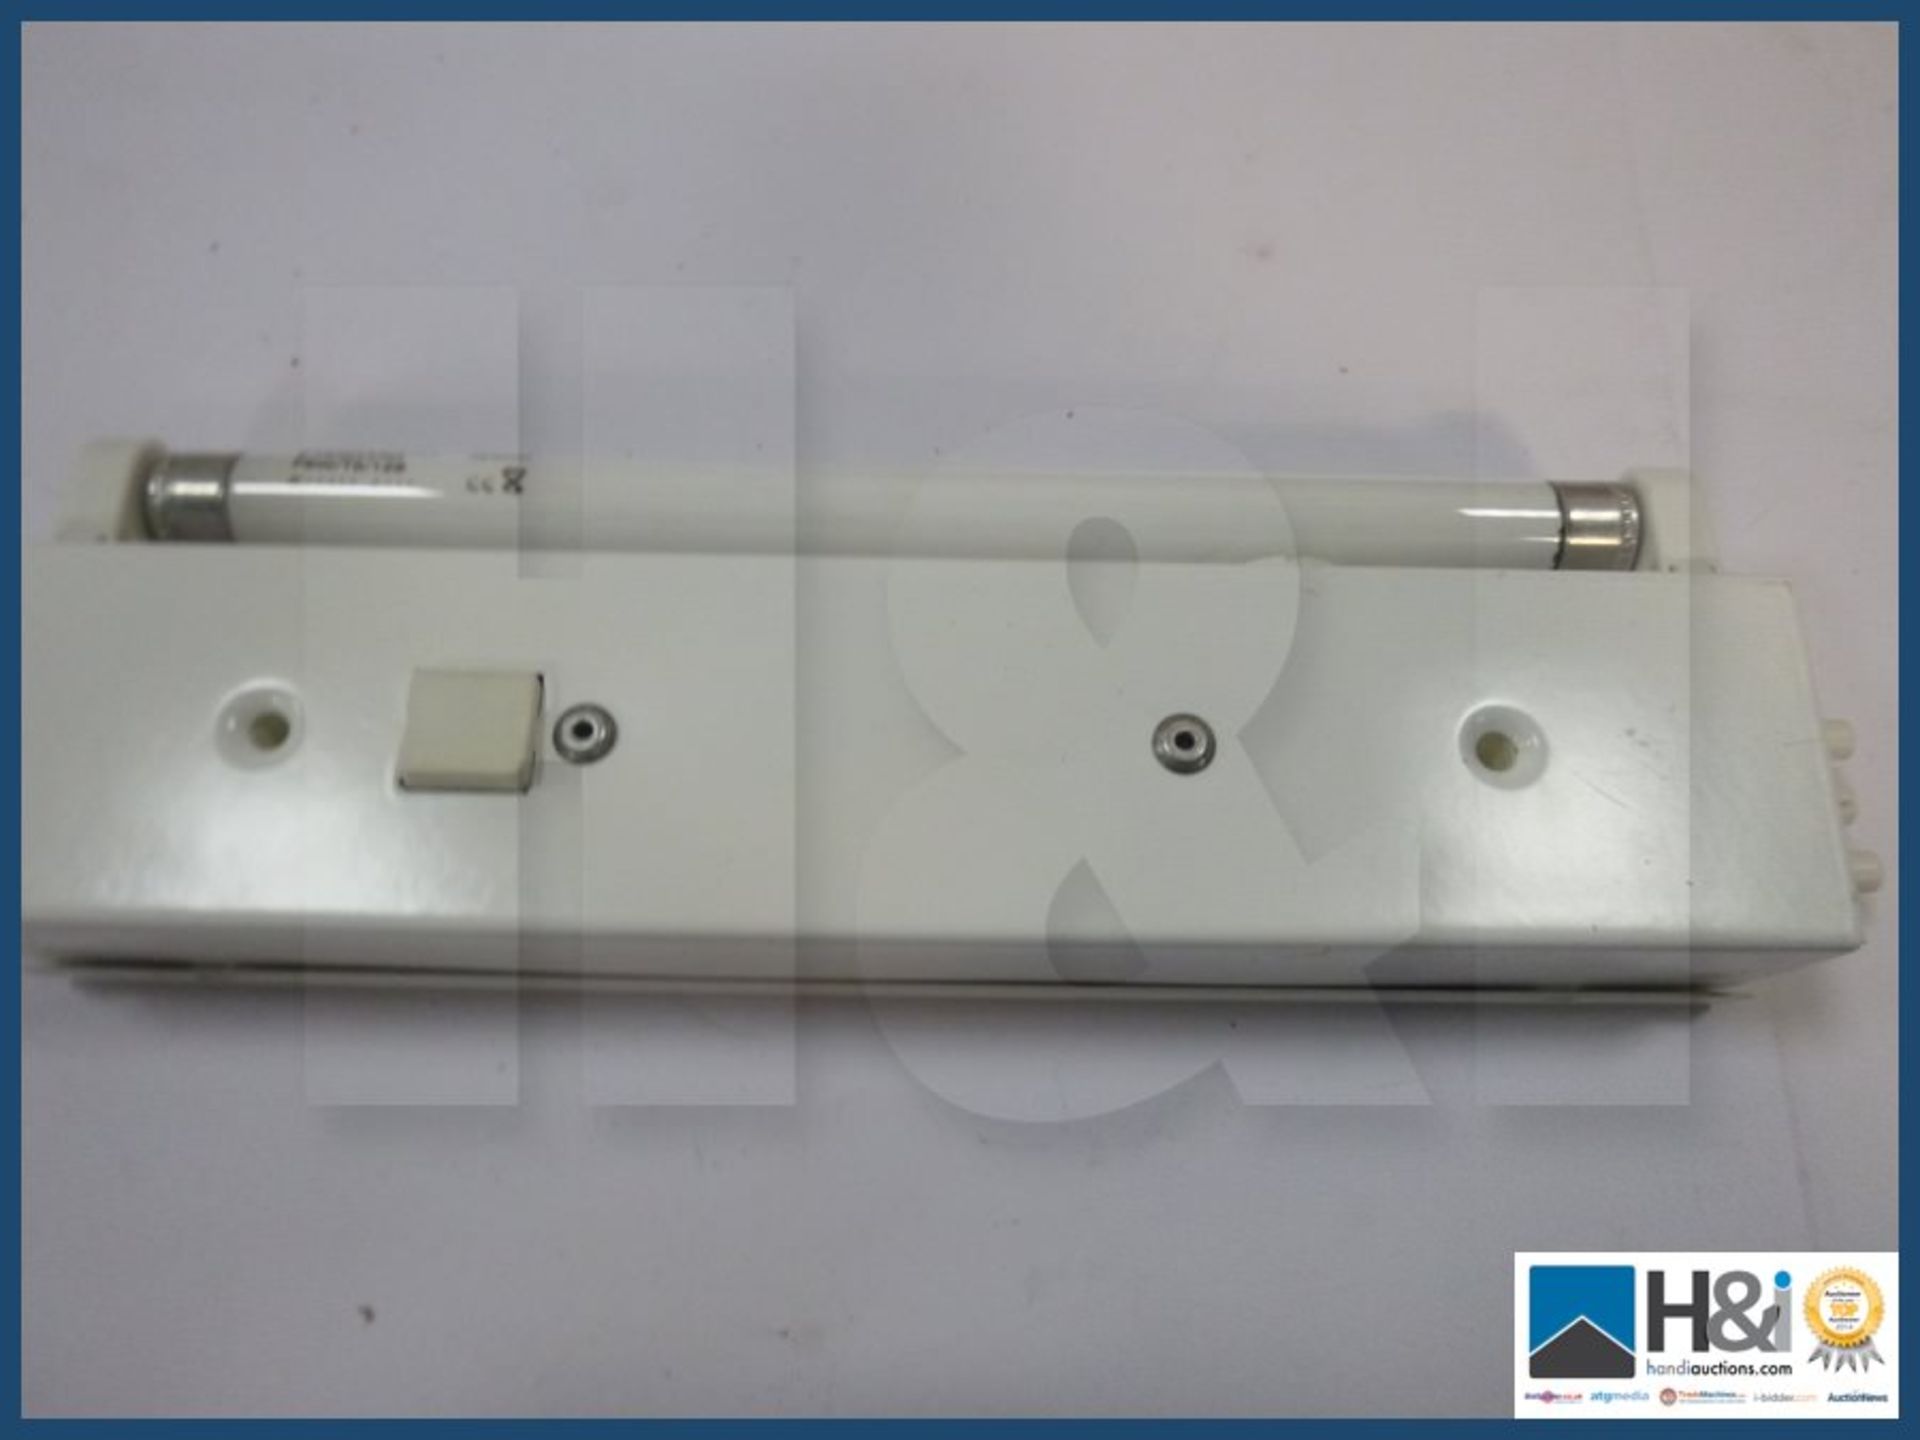 X5 Modular fluorescent light fitting. 240V/50Hz / 6w with mains leads. - Image 2 of 3